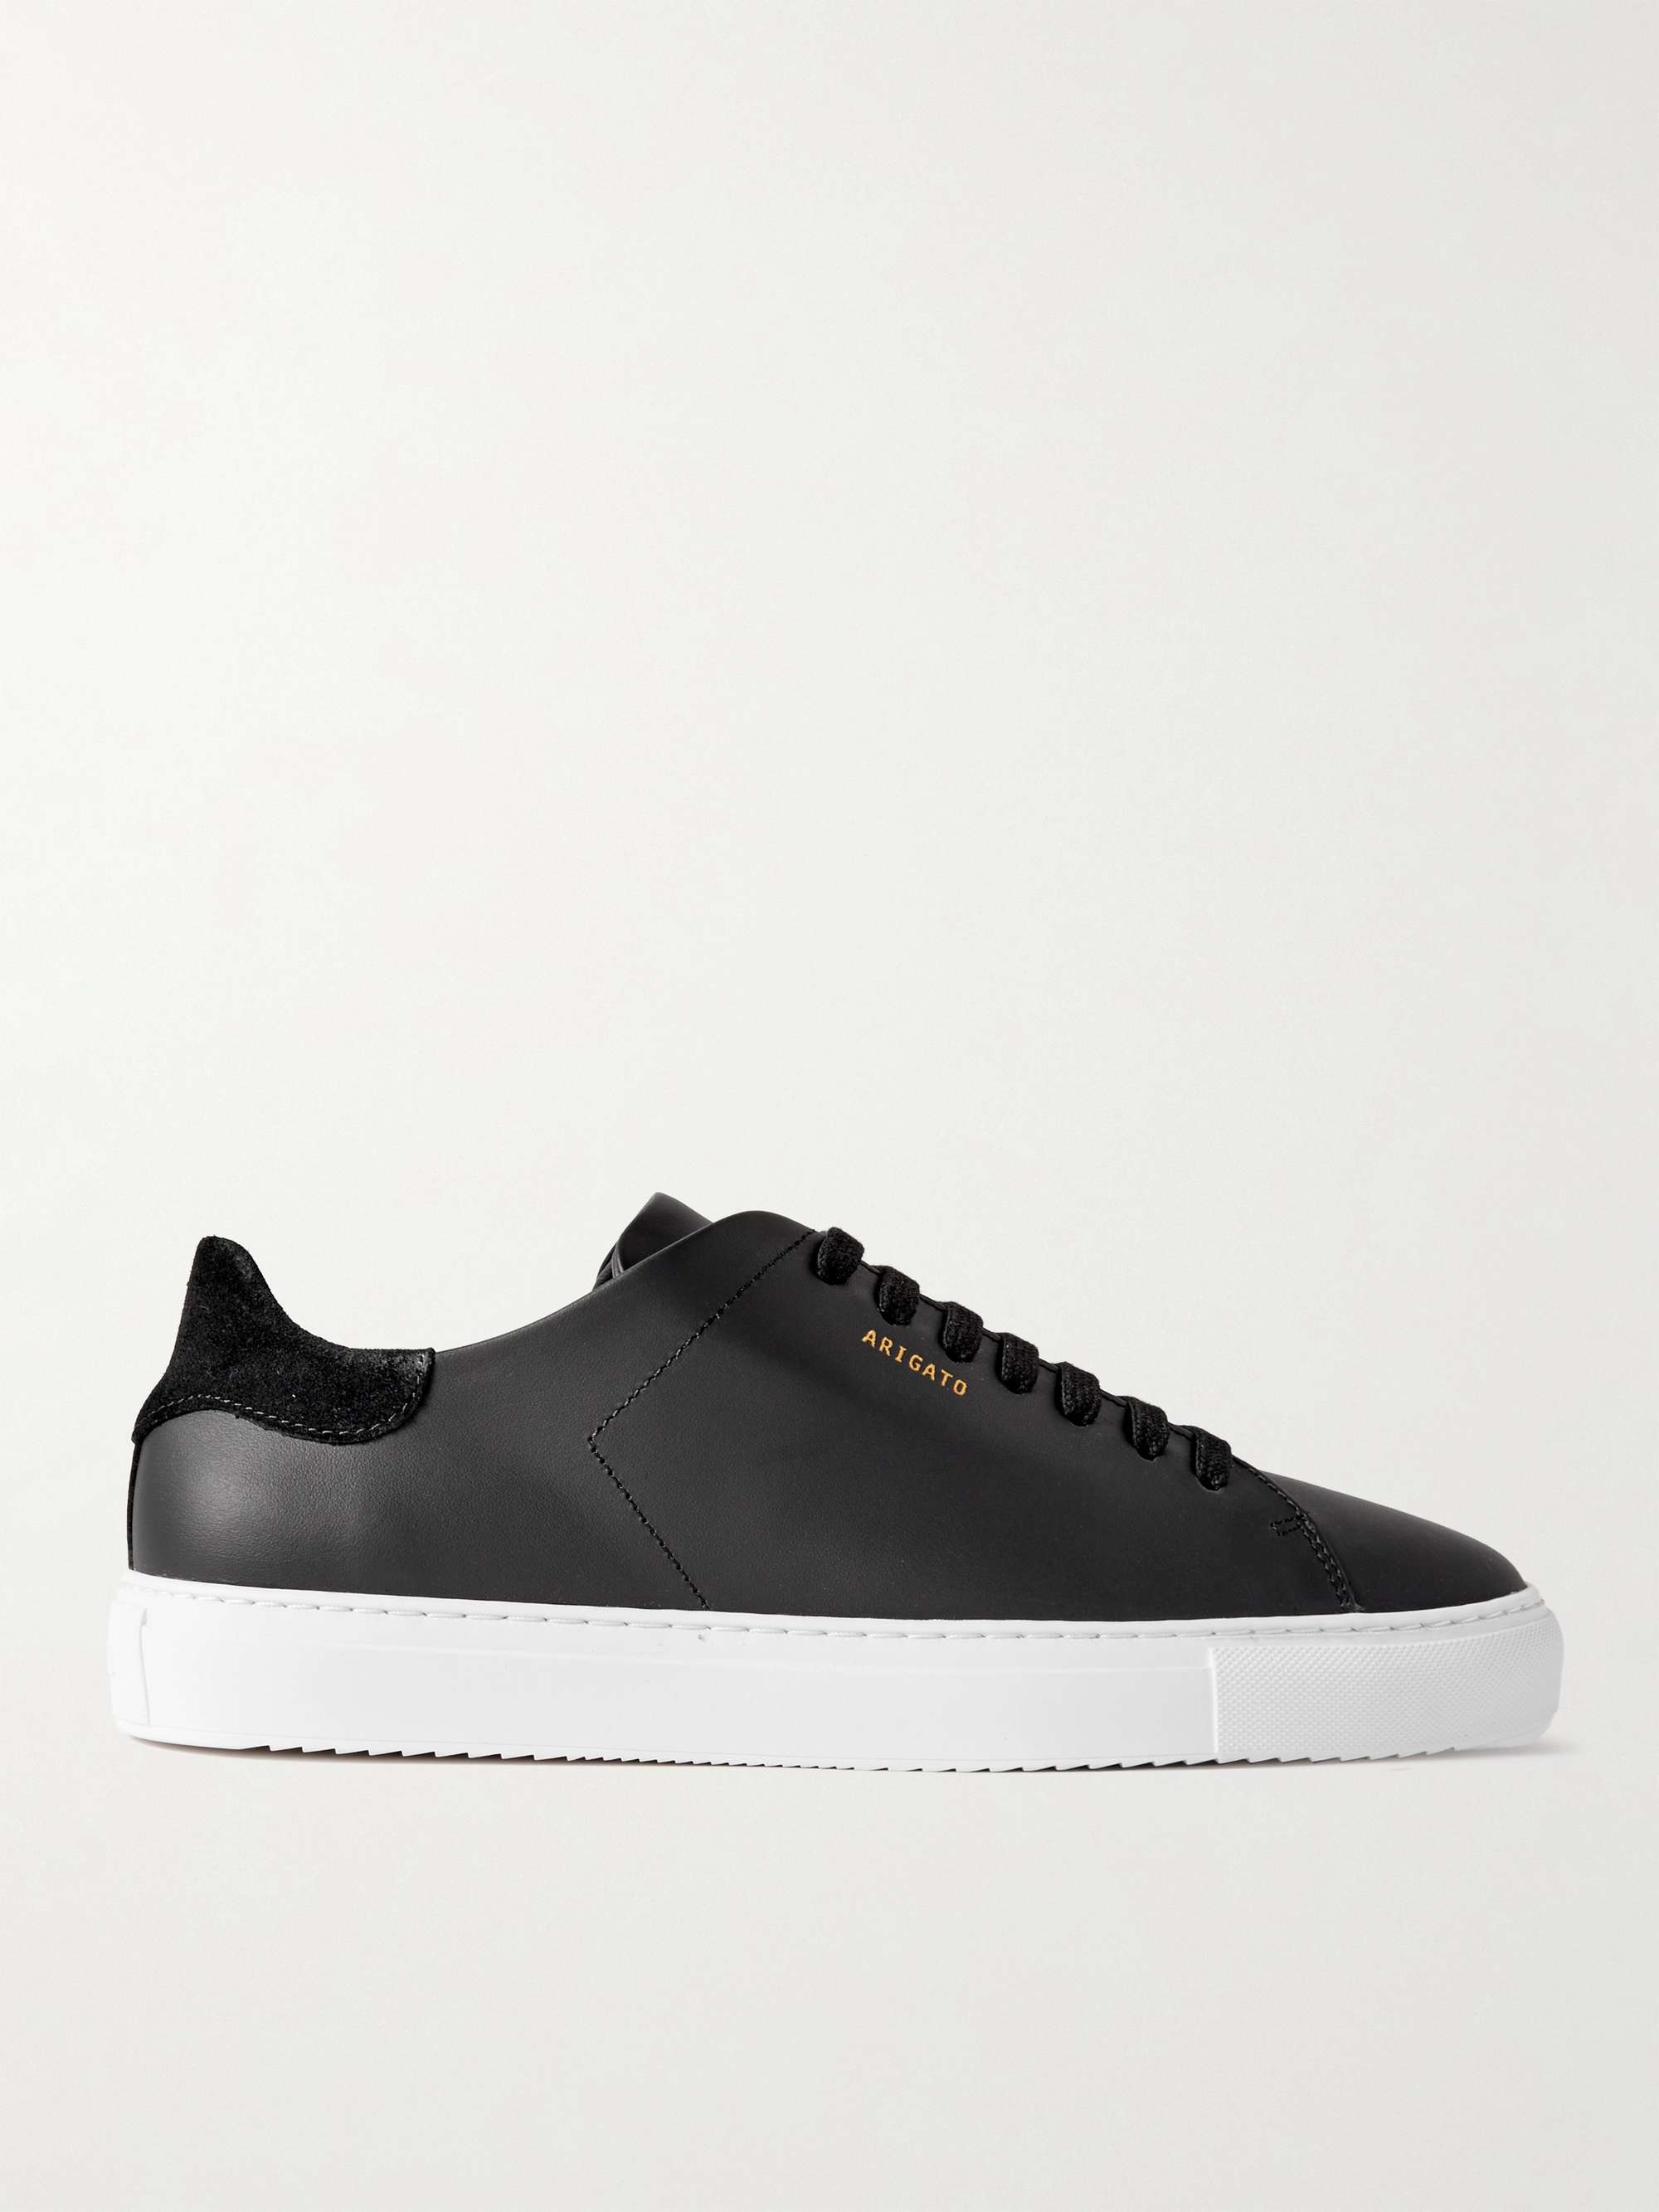 AXEL ARIGATO Clean 90 Leather Sneakers | MR PORTER